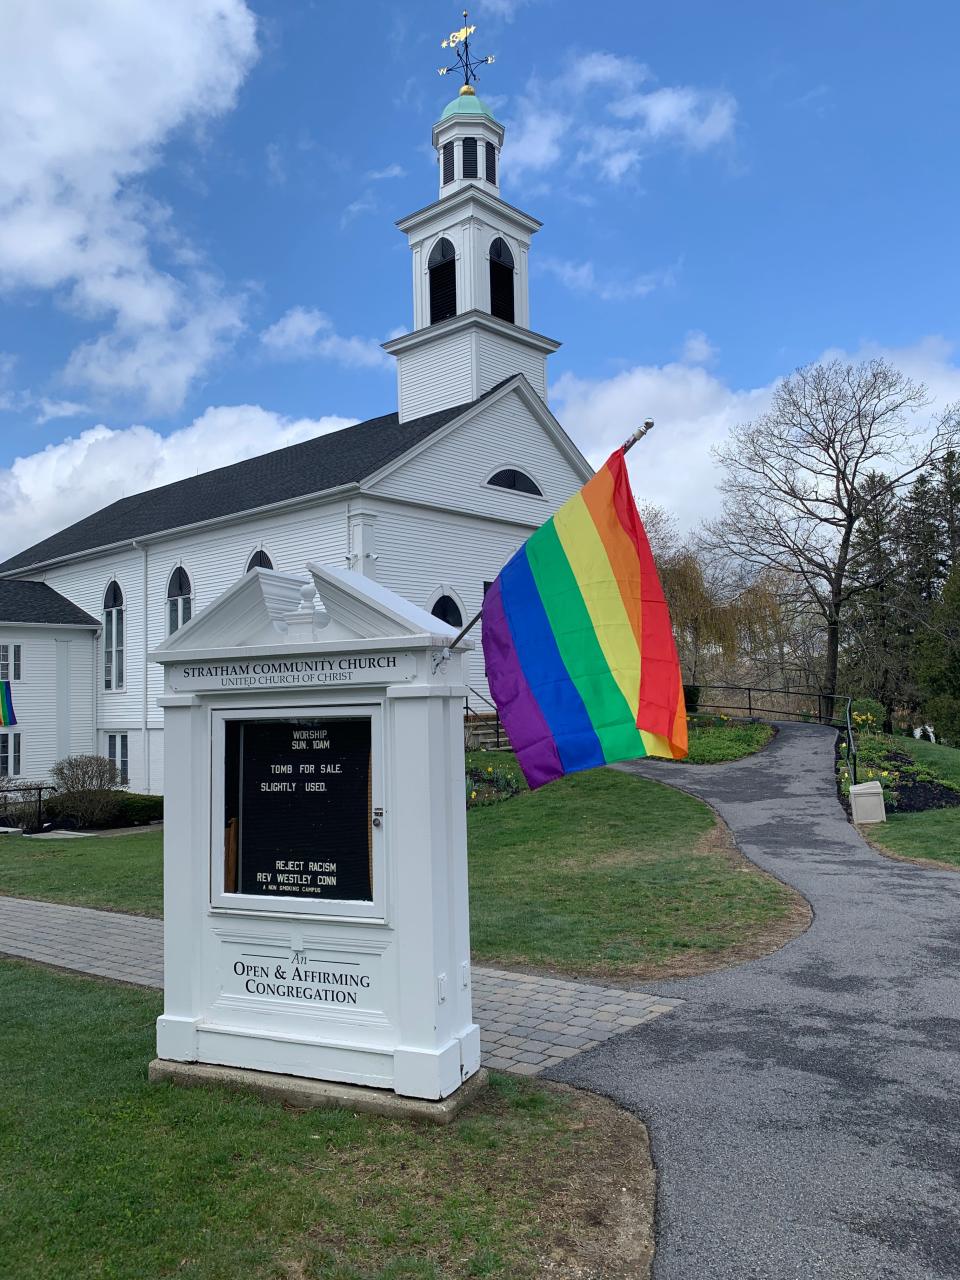 The Stratham Community Church recently raised a new larger pride flag in front of the church after its two previous flags were stolen.